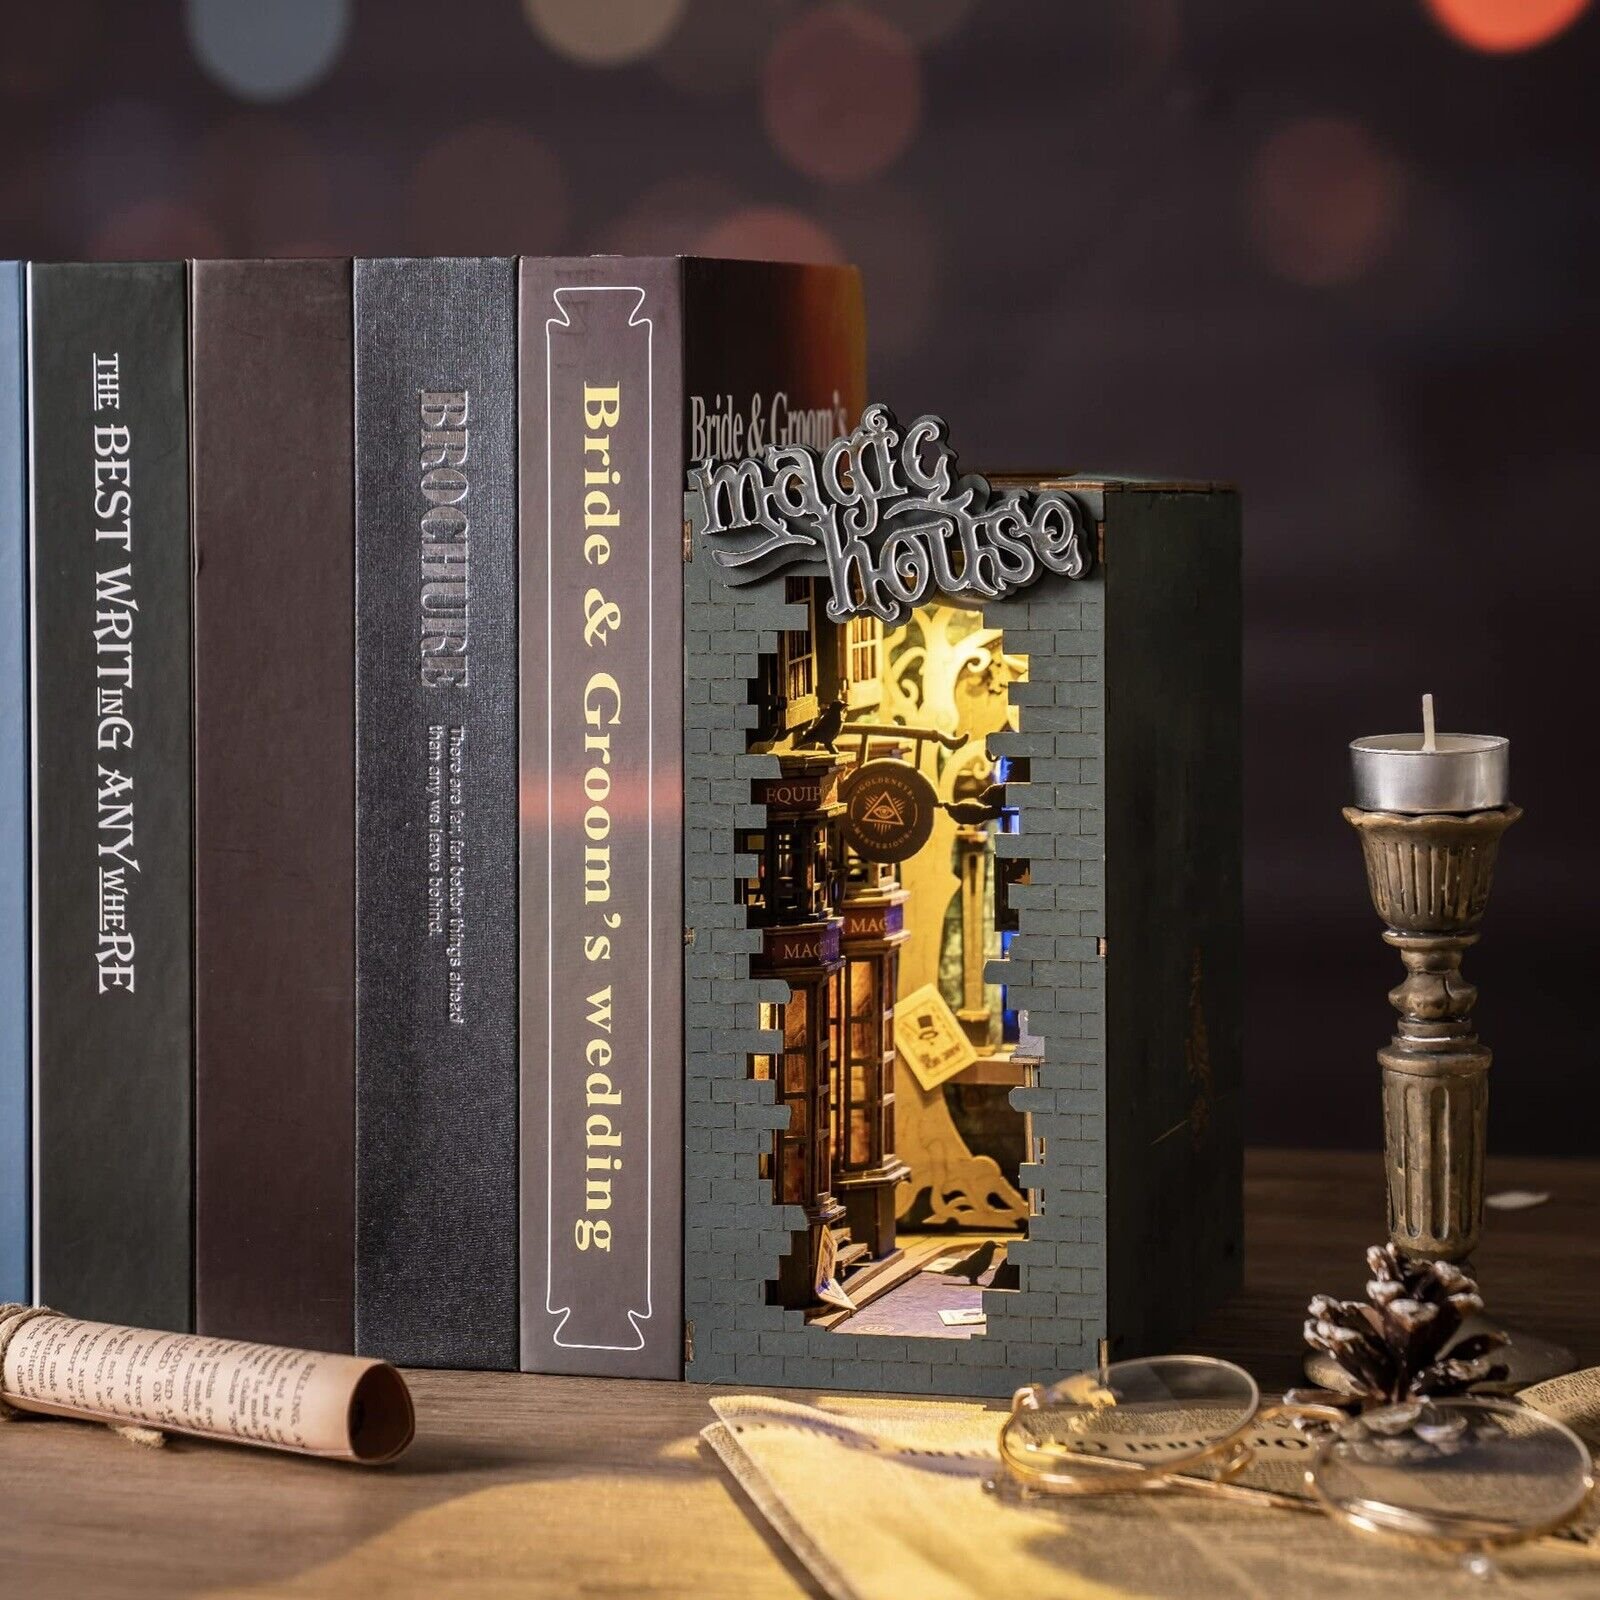 Magic House  - 3D Creative Bookend by Rolife